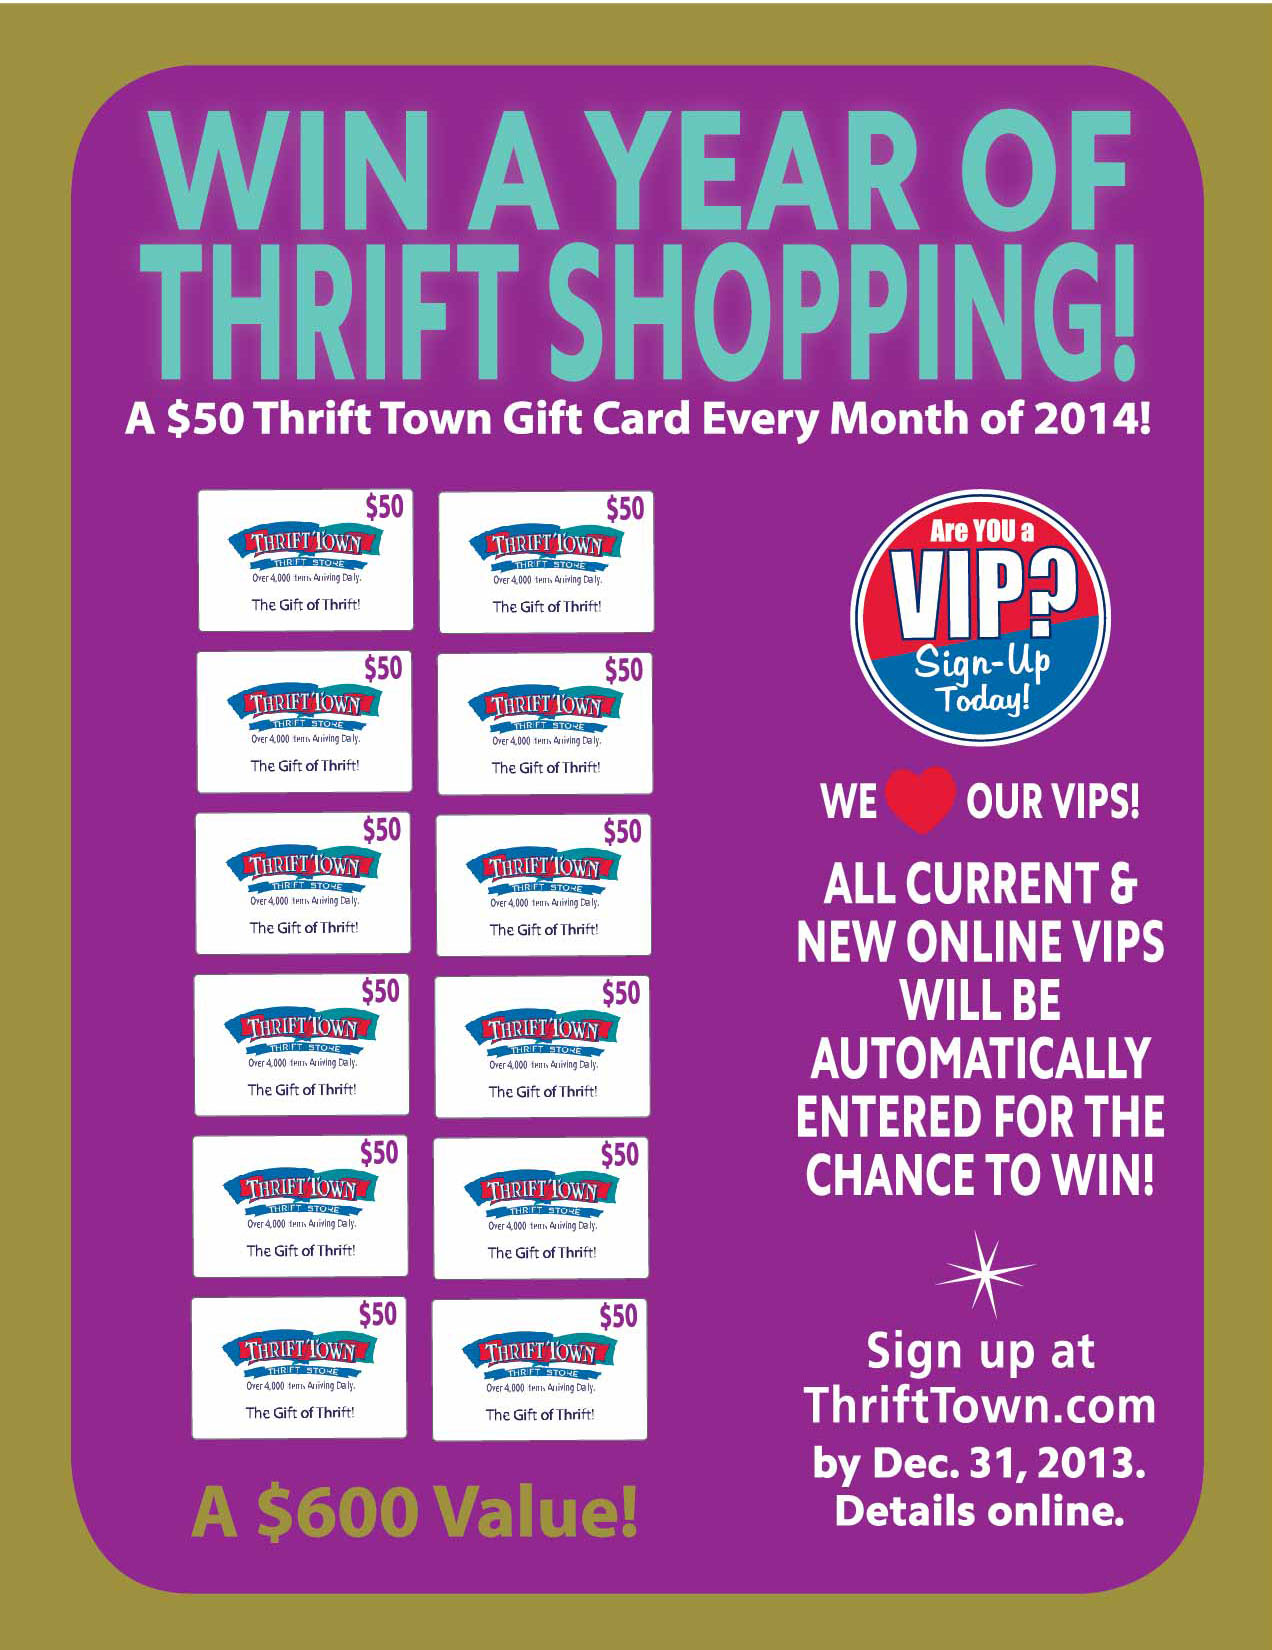 Next Thrift Town VIP Giveaway on December 31st, 2013